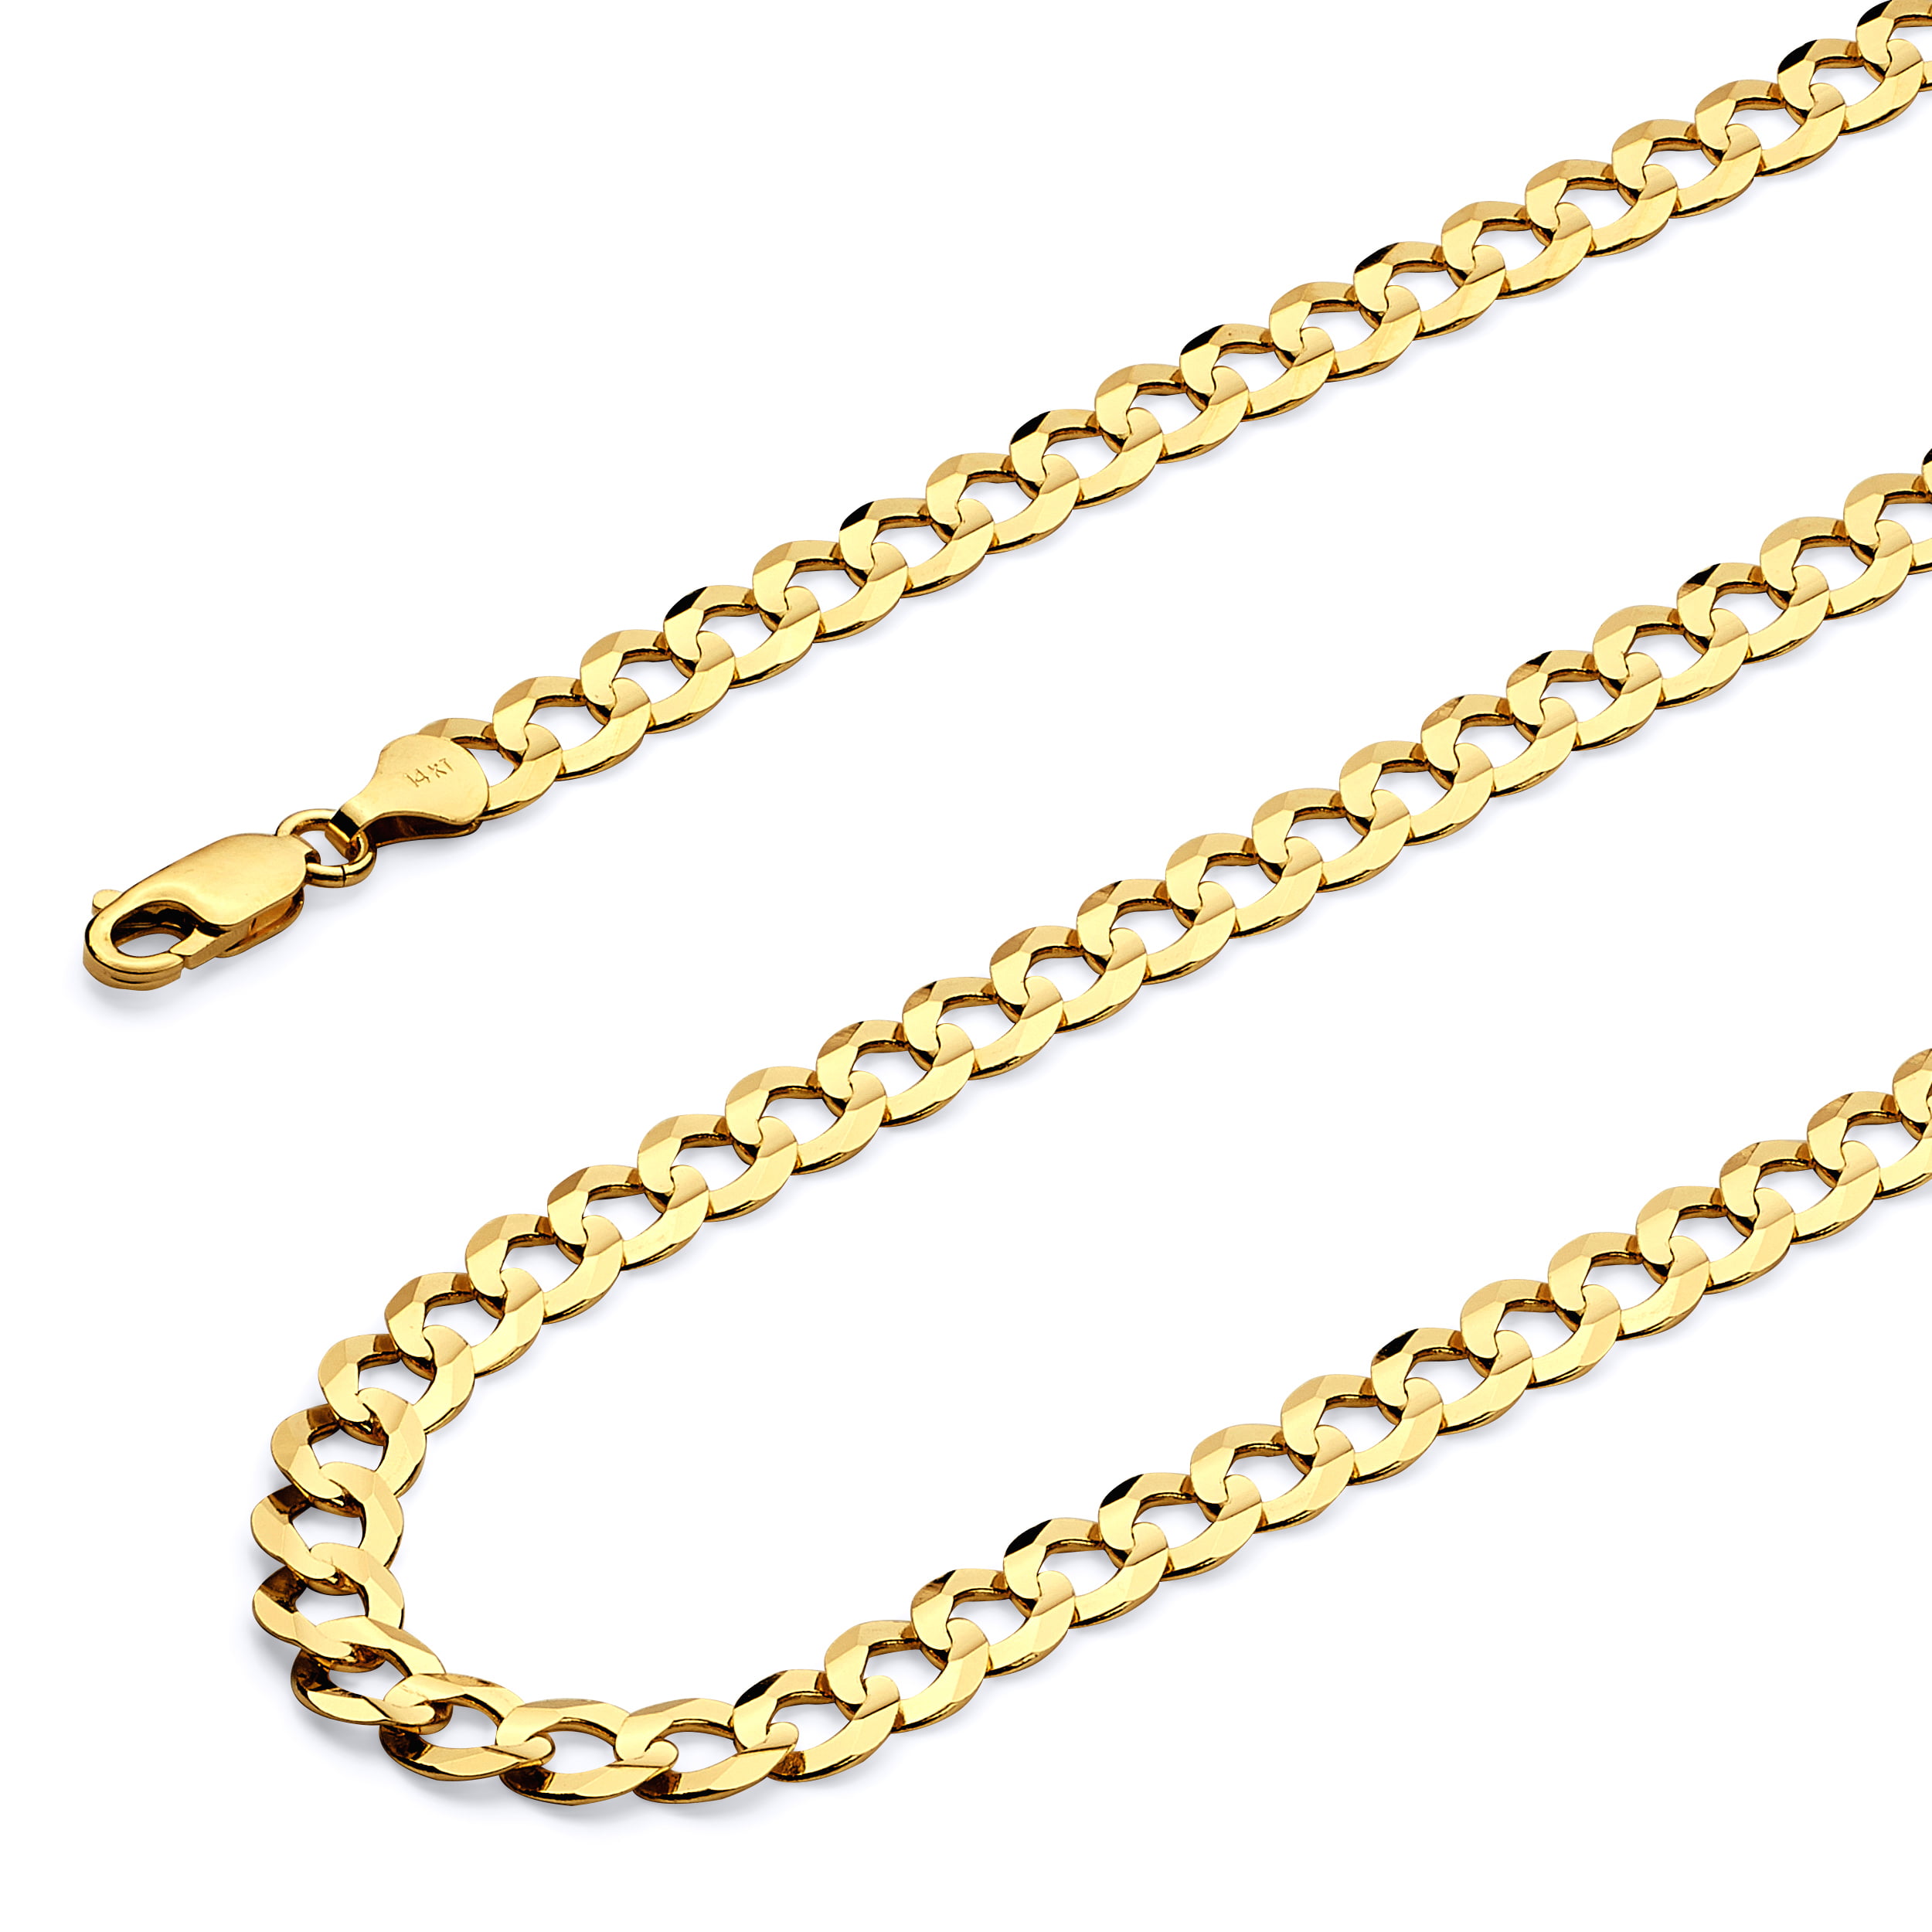 Wellingsale 14k Yellow Gold Polished 3.5mm HOLLOW Mariner Chain Necklace